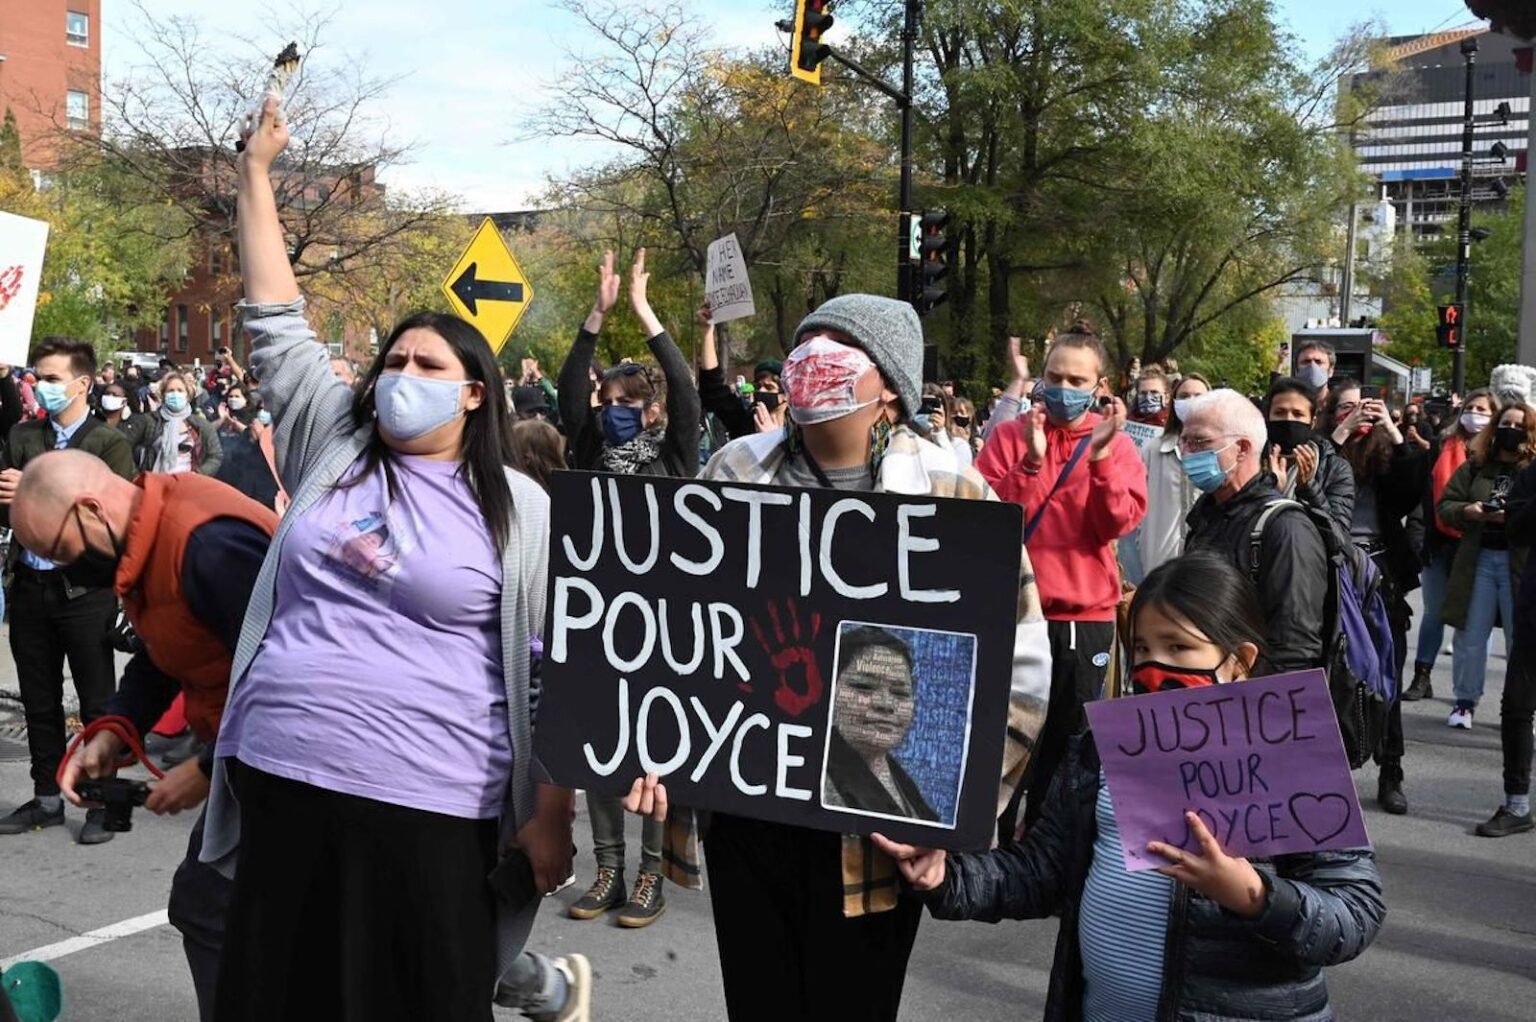 Indigenous women like Joyce Echaquan still face deadly racism in North America. Learn about the MMIW epidemic and how we can stop it.